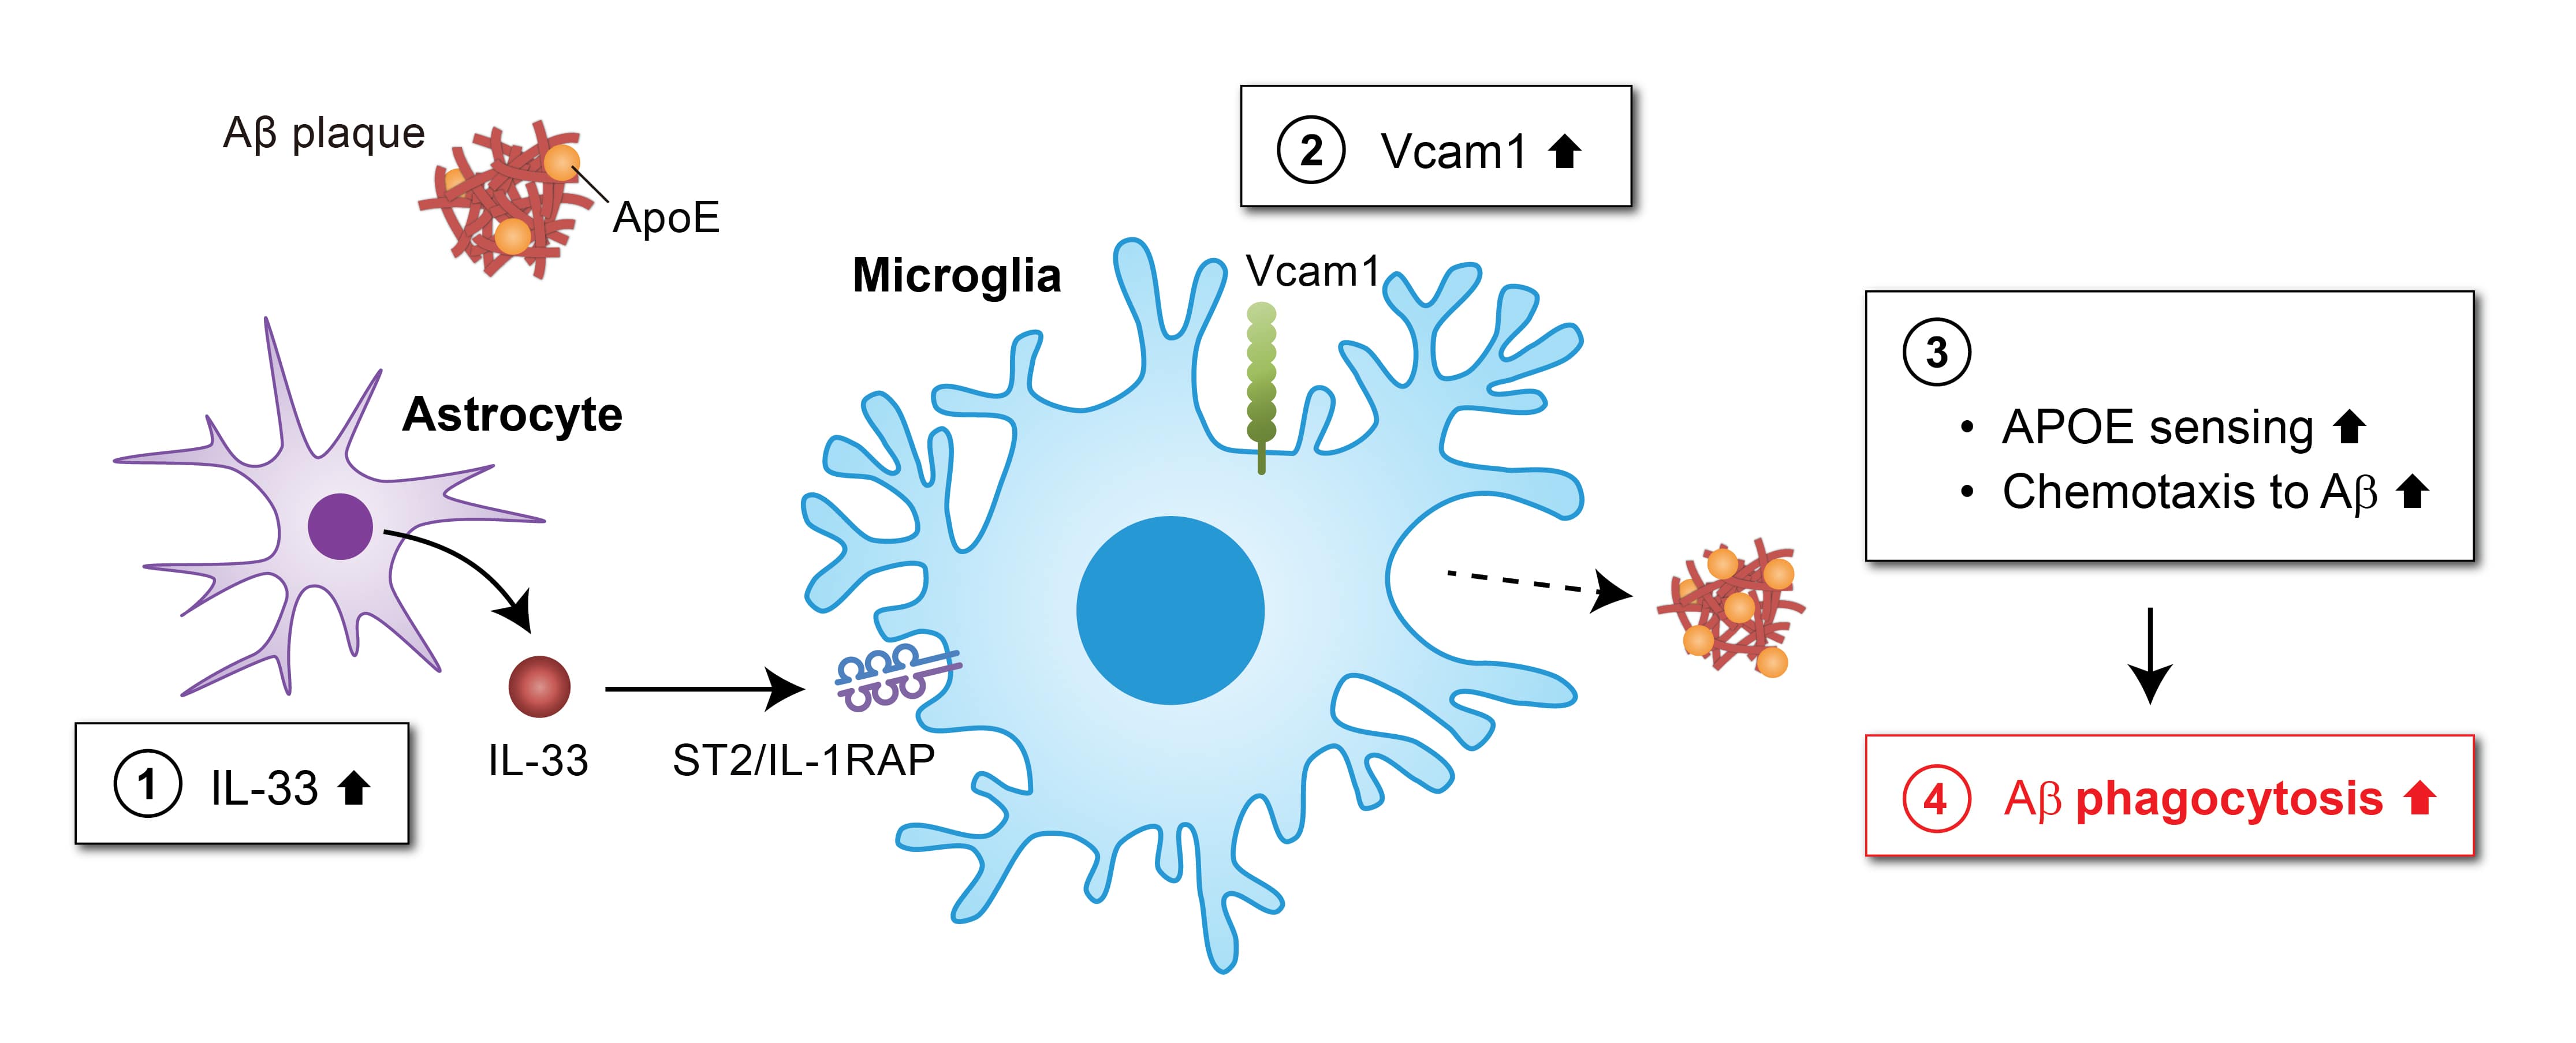 The diagram illustrates the VCAM1-APOE signalling pathway as a potential therapeutic target for Alzheimer’s disease. Interleukin-33 (IL-33) (1) increases VCAM1 expression in microglia (2), which stimulates the attraction of microglia to APOE-associated amyloid-β (Aβ) deposition (3), leading to the clearance of Aβ in the brain (4).